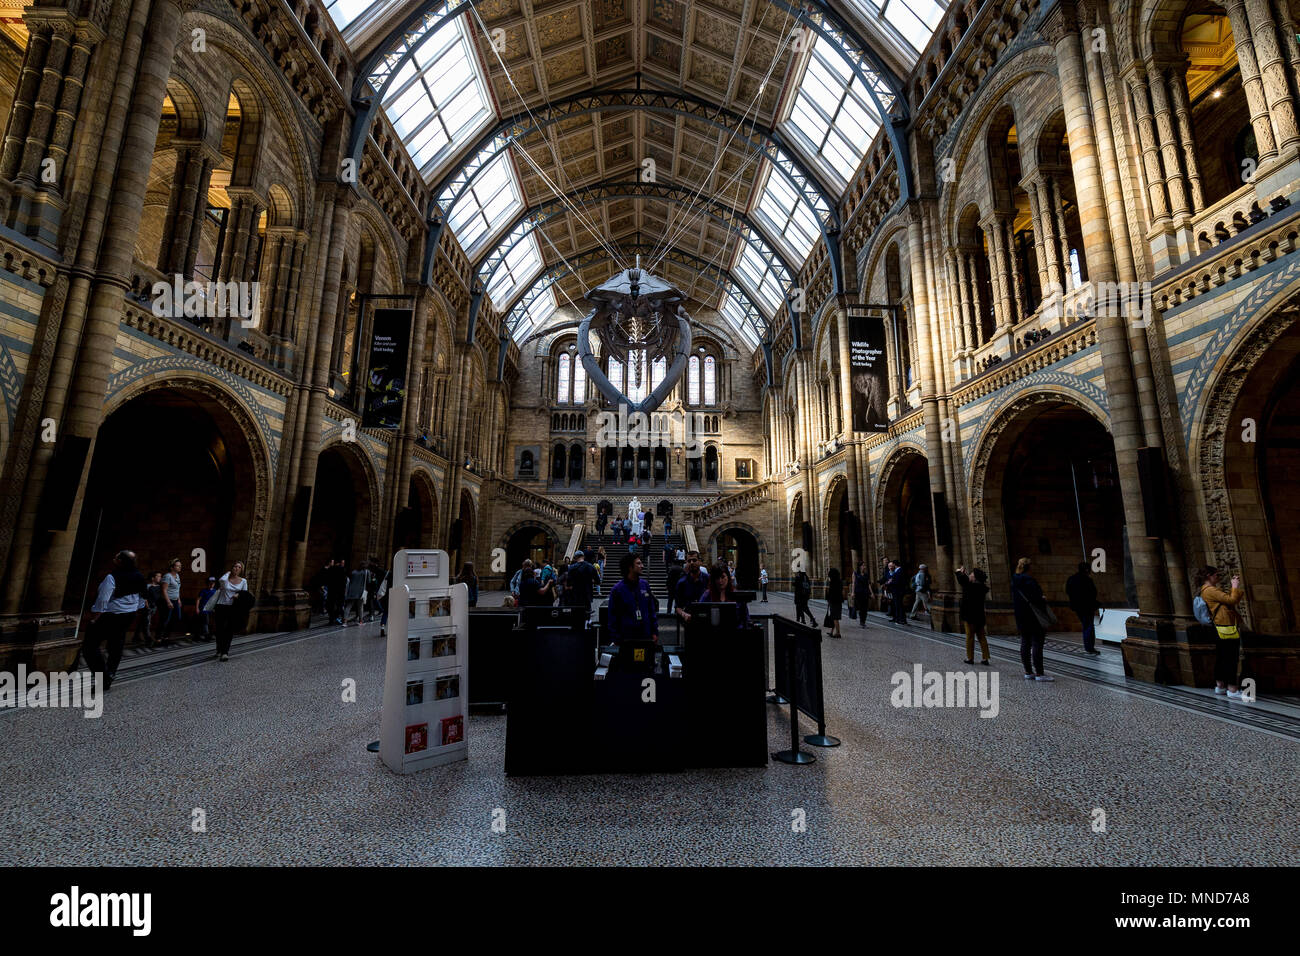 LONDON - MAY 10, 2018: Interior of Natural History Museum buiding in London with blue whale skeleton Stock Photo